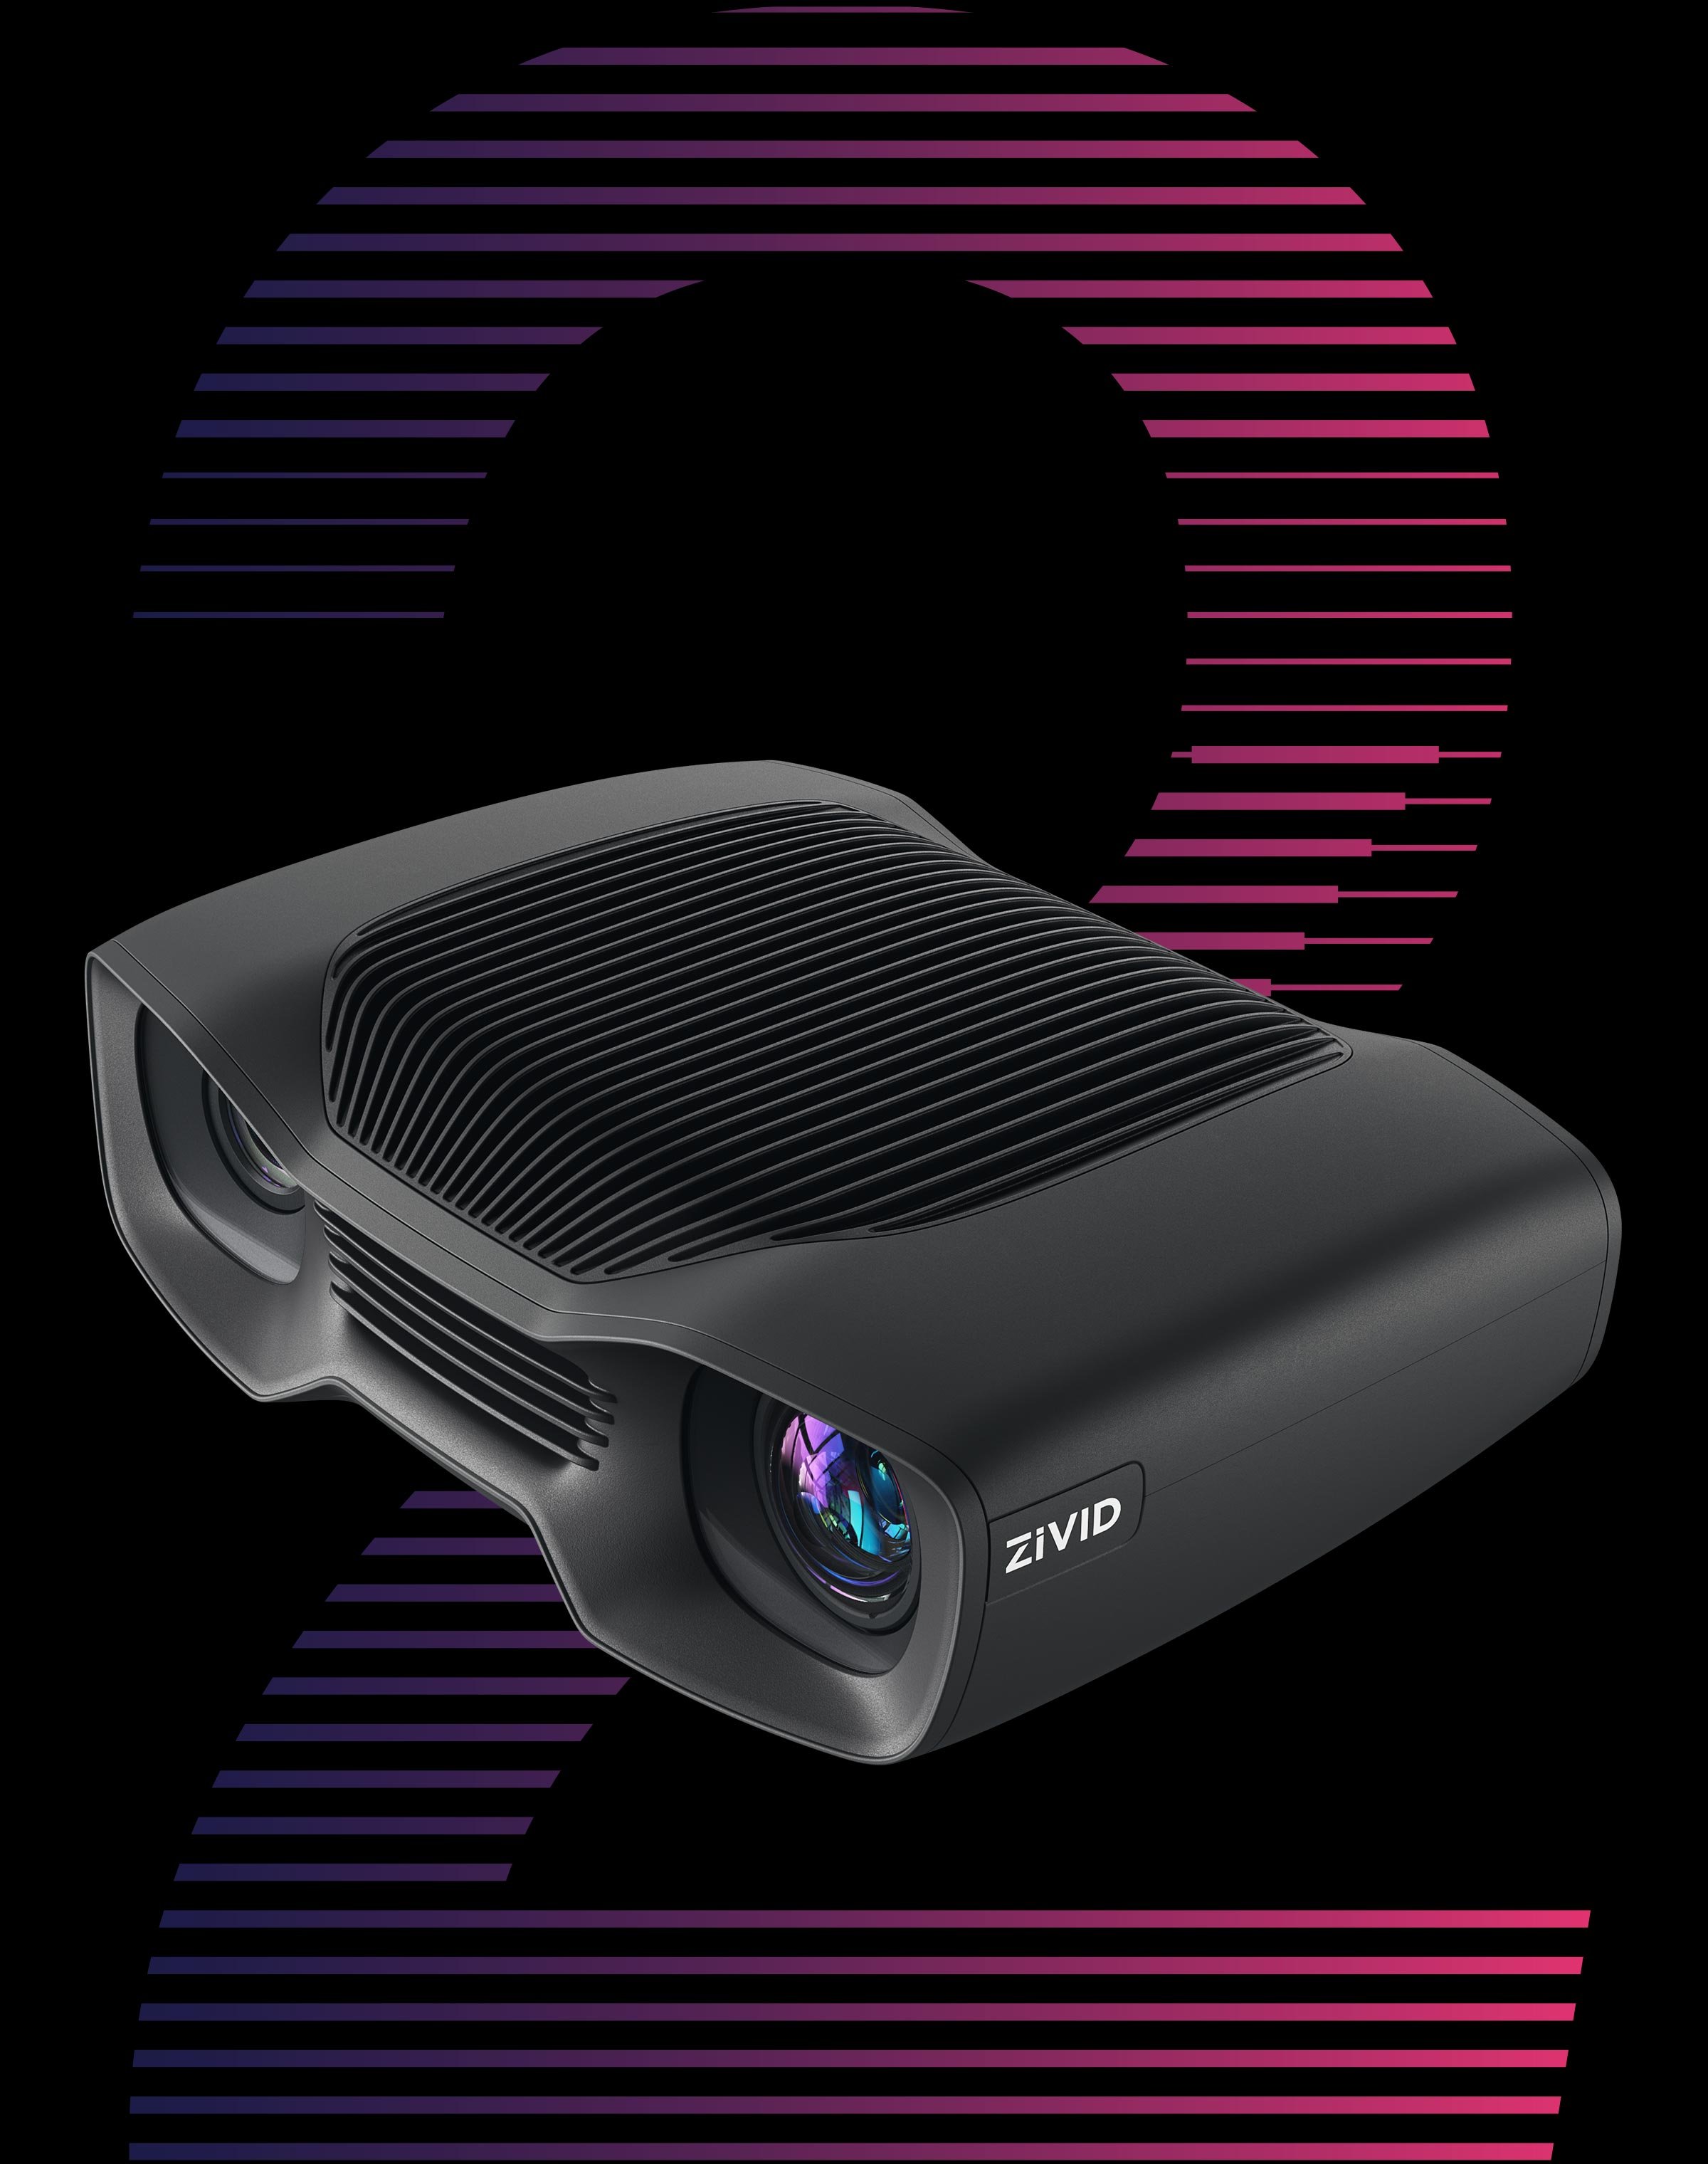 Zivid-Two-Industrial-3D-color-camera-bg